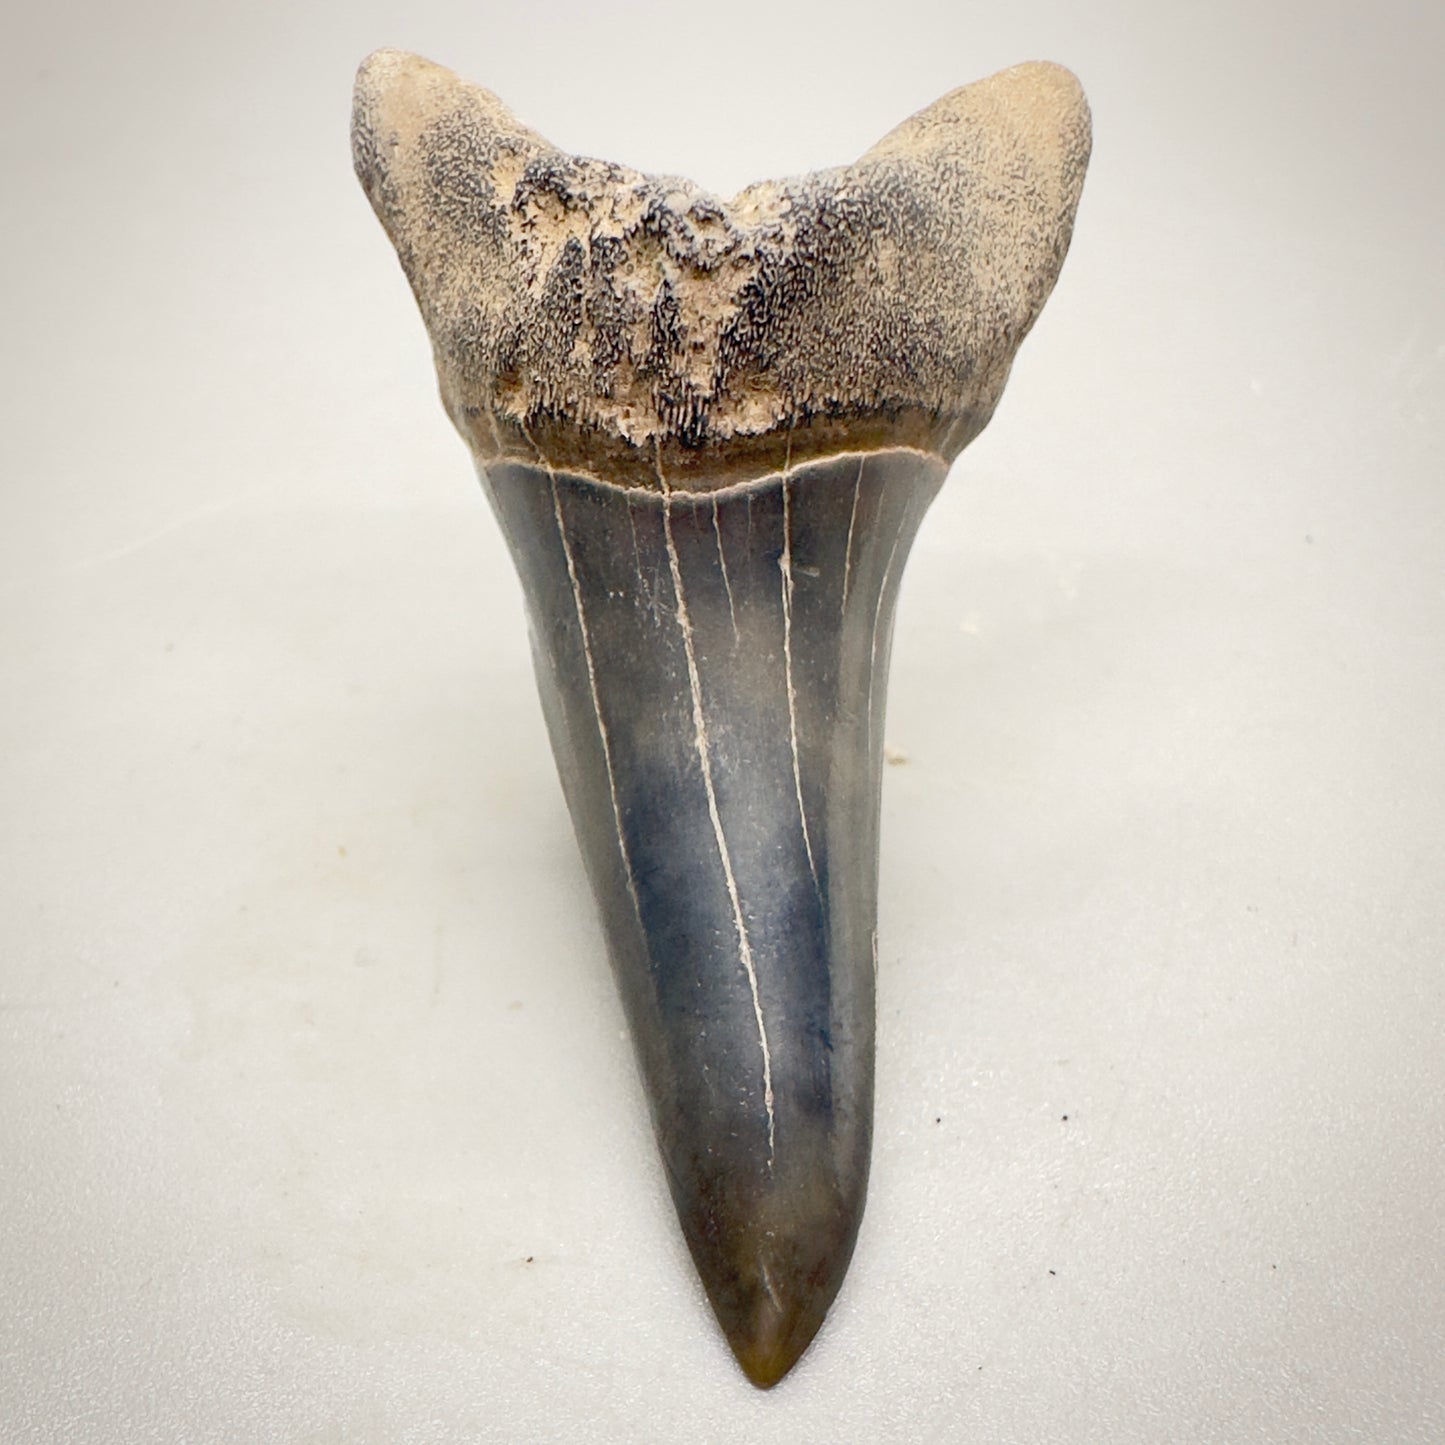 2.31 inches colorful Fossil Shortfin Mako - Isurus desori Shark tooth from Southeast, USA M23 front down